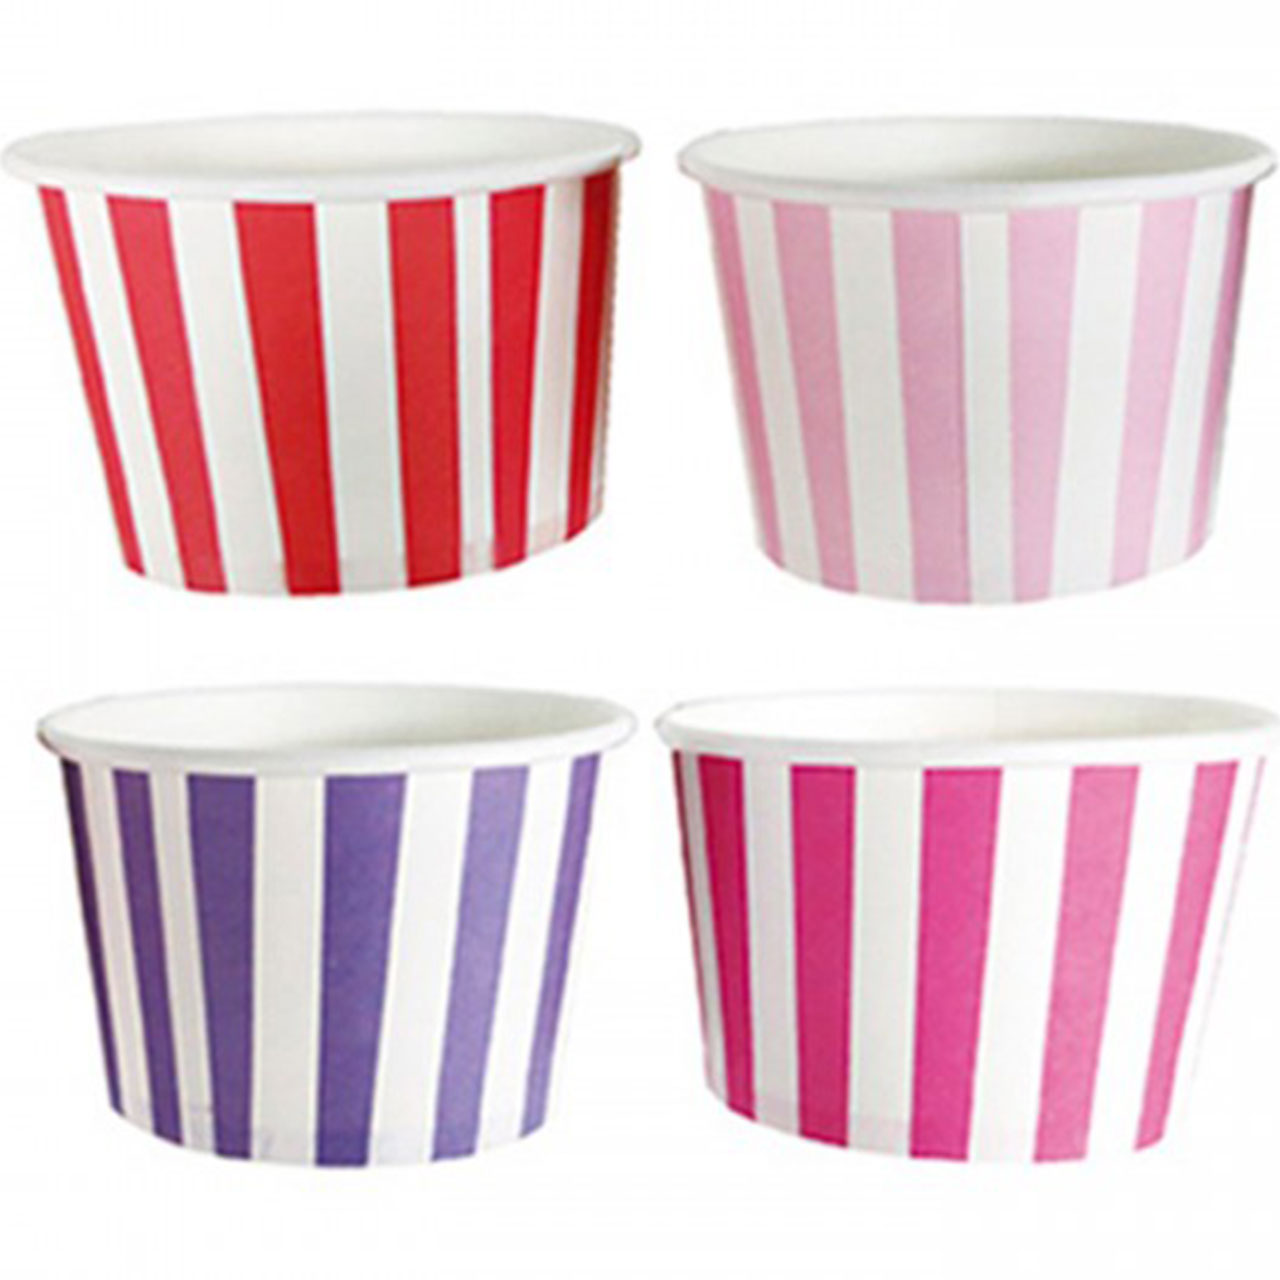 8 Assorted Stripe Treat Cups - Pink